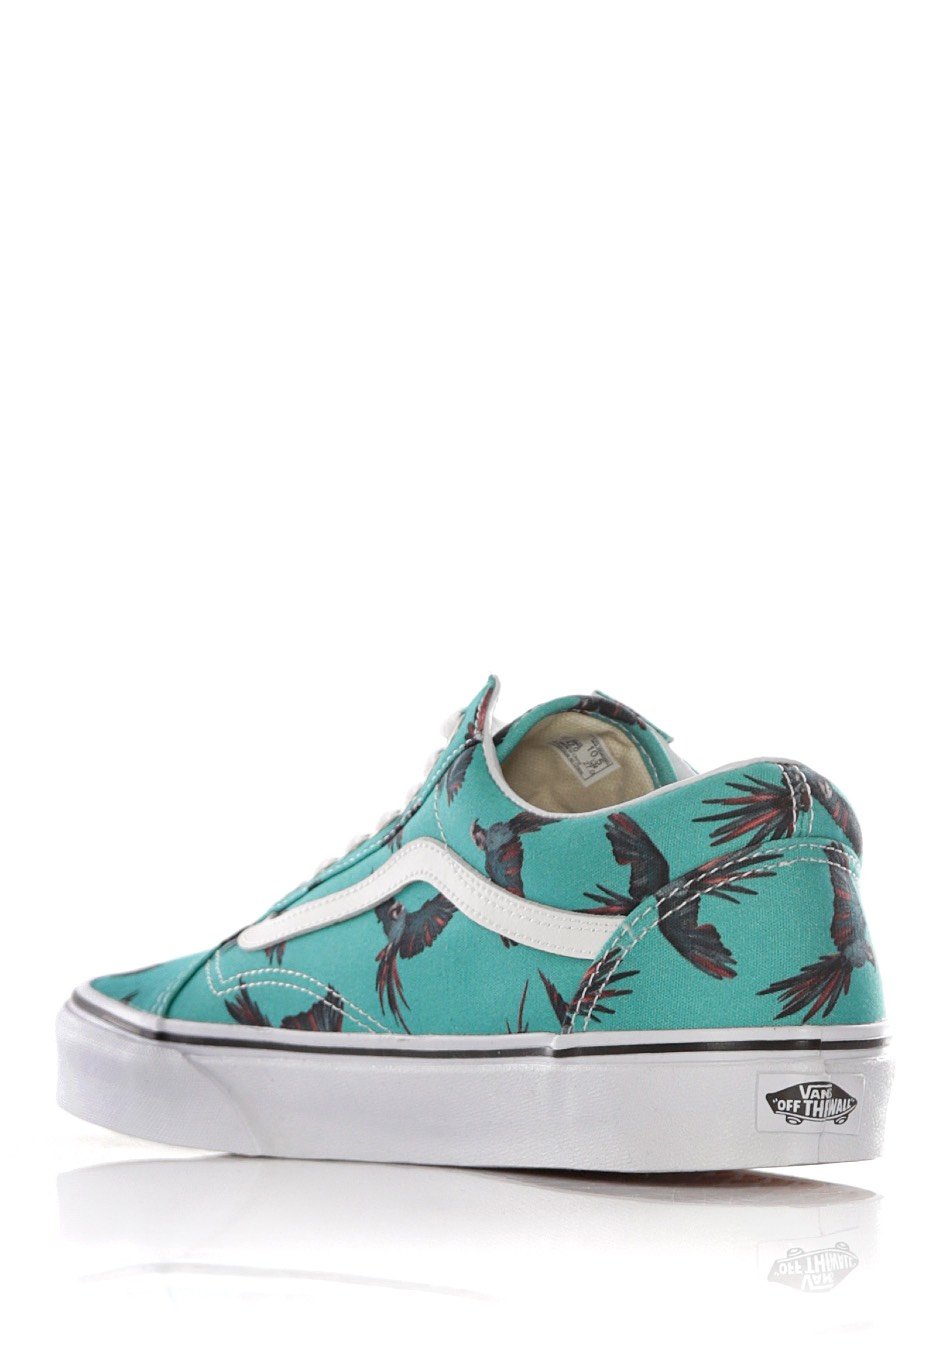 Vans - Old Skool Dirty Bird Turquoise/True White - Shoes - Impericon ...